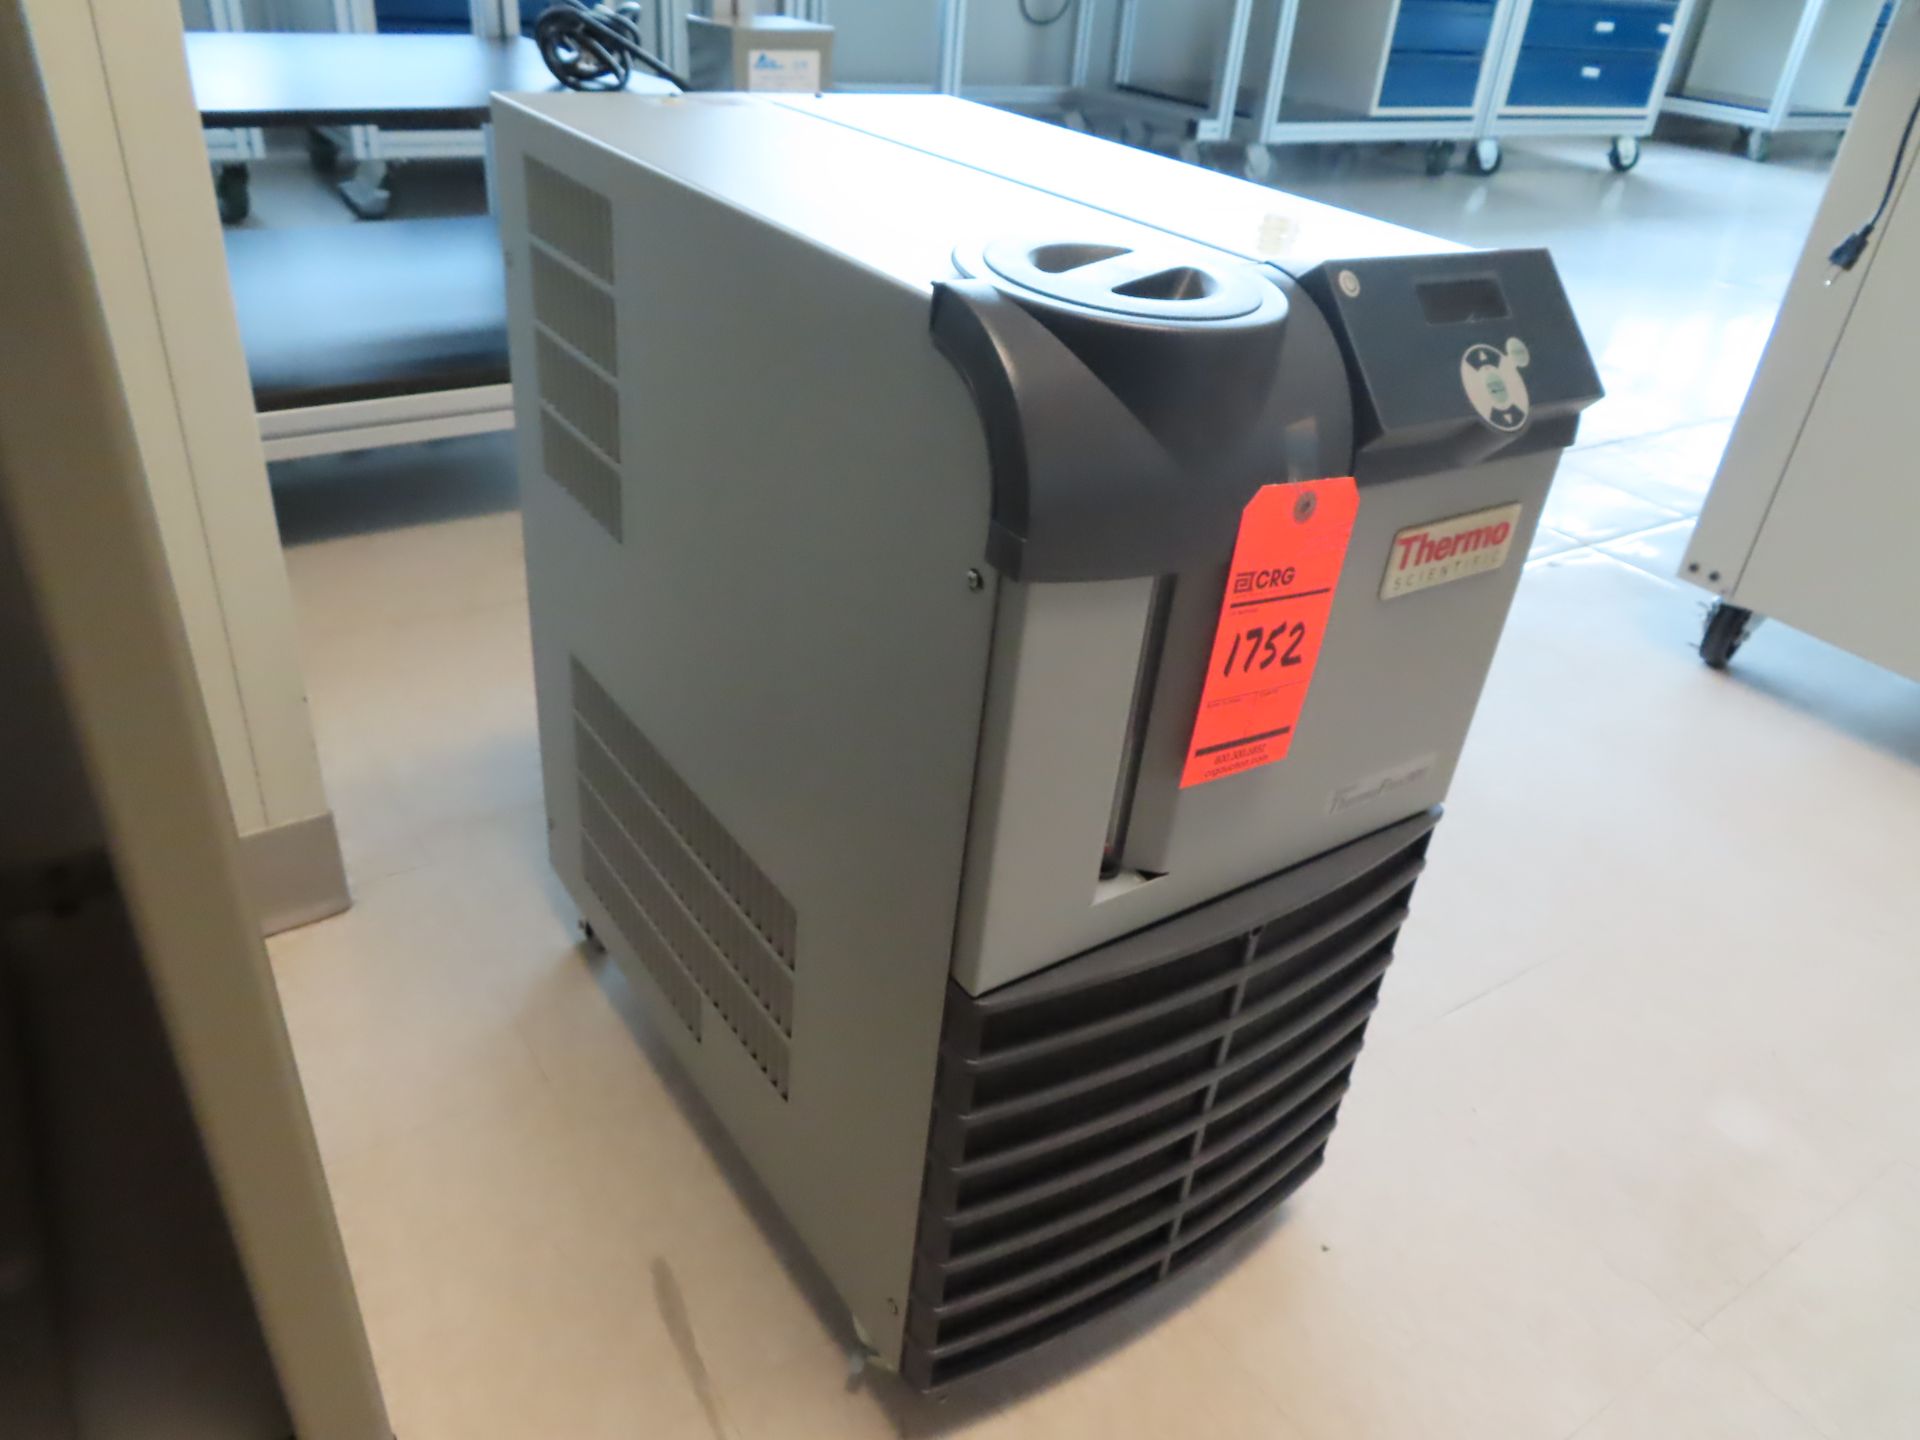 Thermo NesLab Thermoflex 900 chiller, located in B wing, 4th floor, room 449L - Image 2 of 2